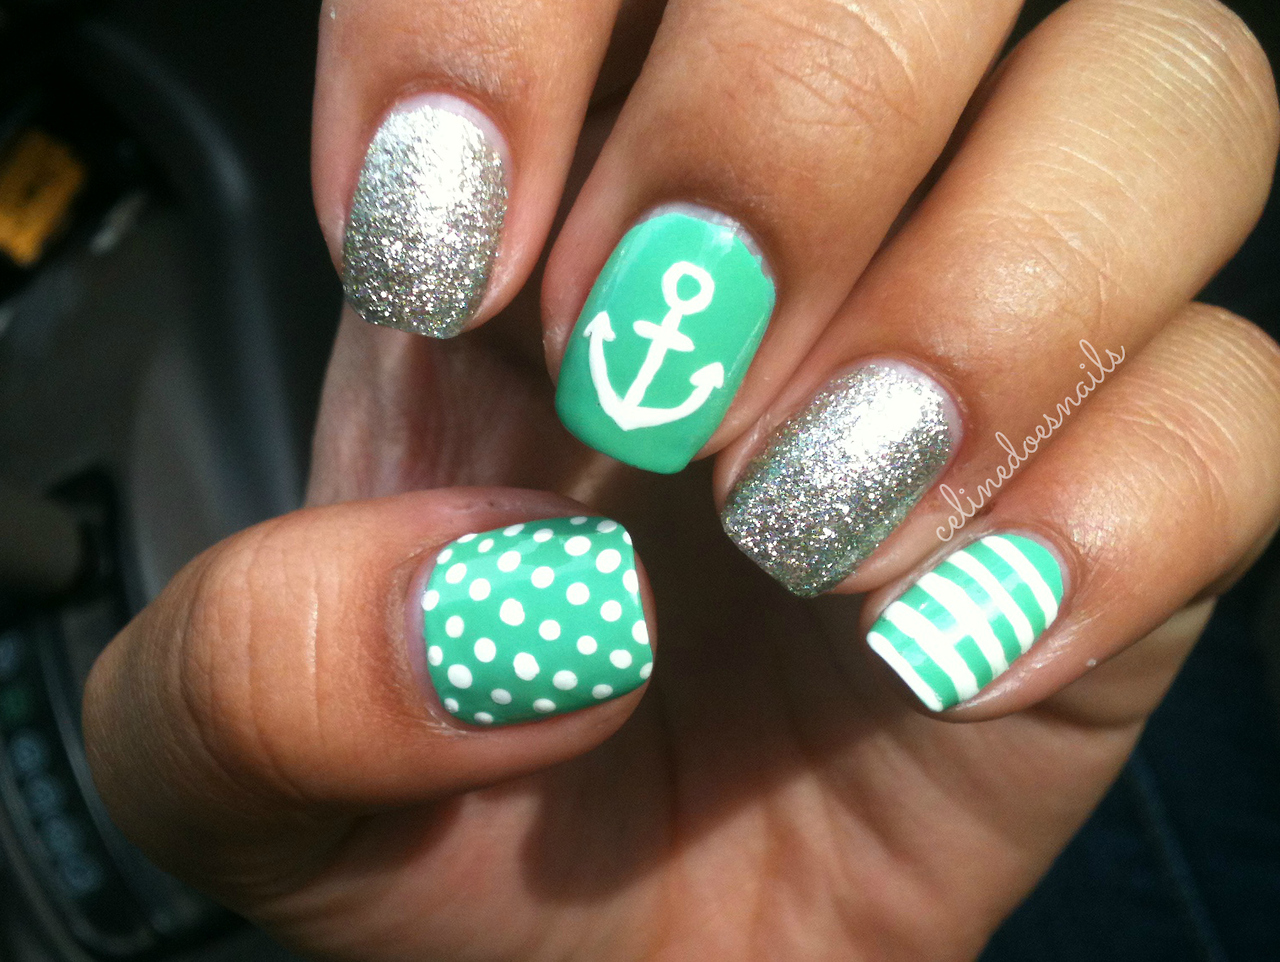 4. Quick and Easy Anchor Nails - wide 3